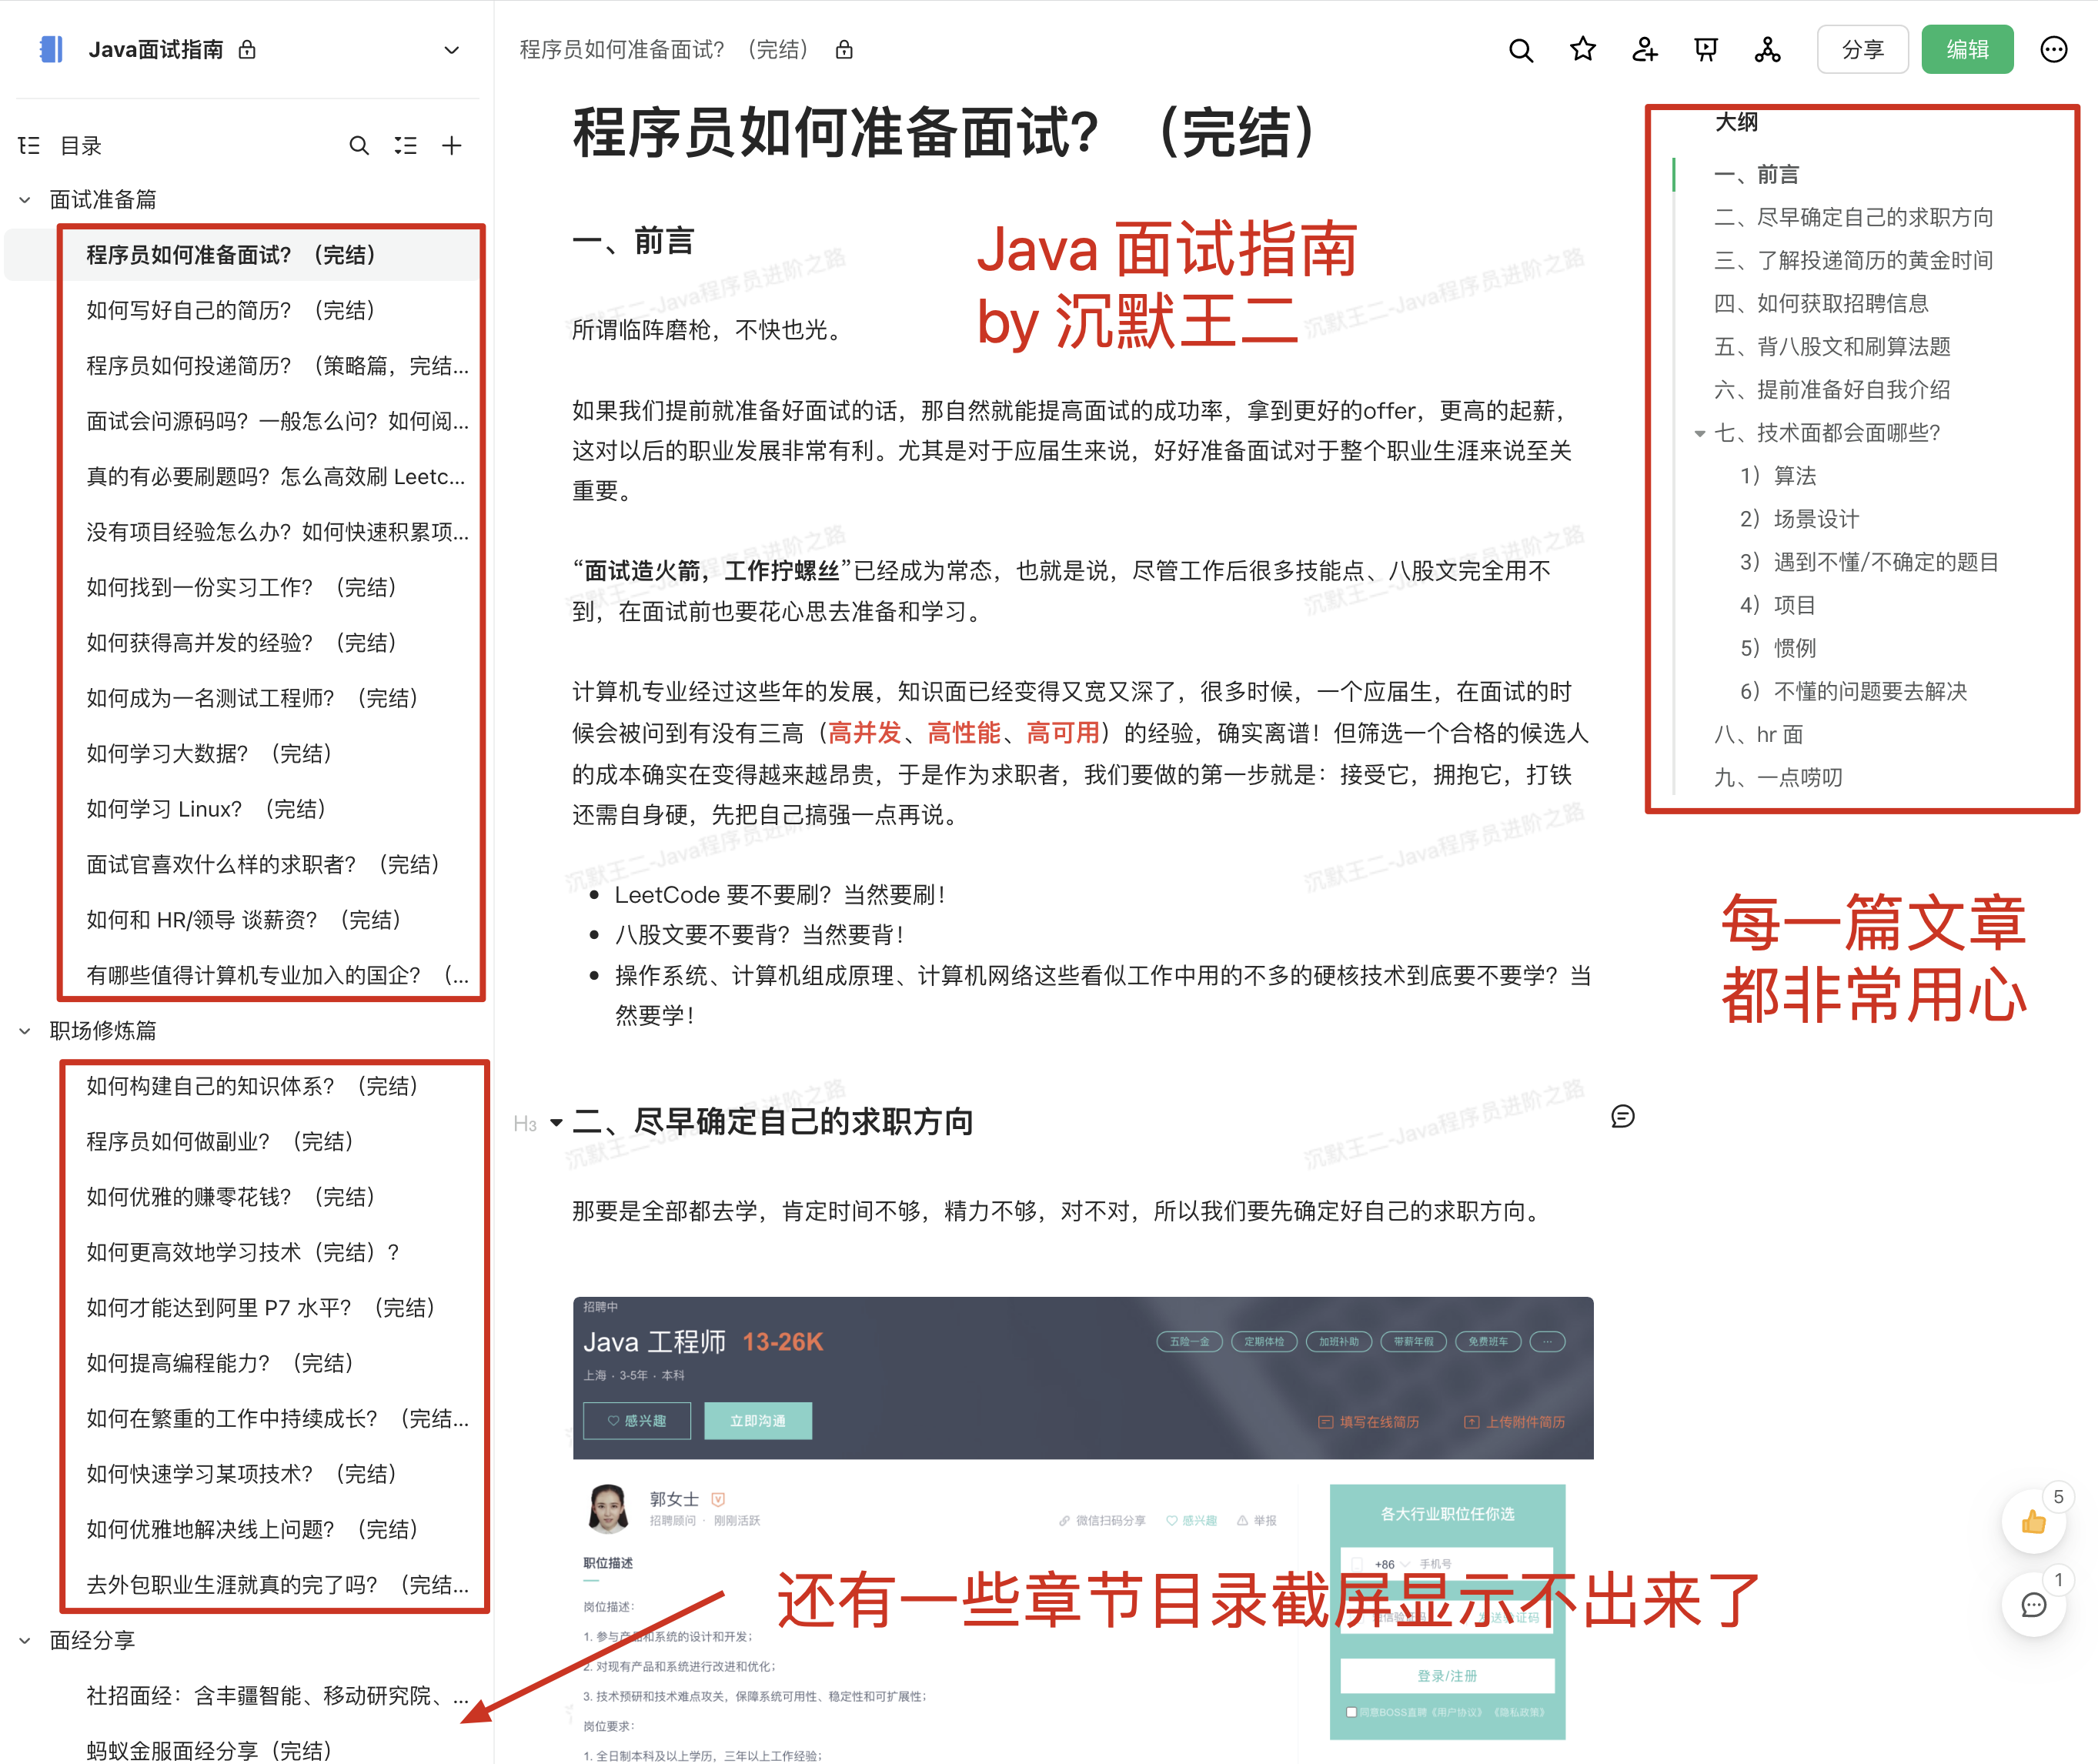 images/nice-article/weixin-gongsxlygtsbtransactionalswzxyydlhcq-3ad64454-3033-40f1-840a-8bd90880b065.png